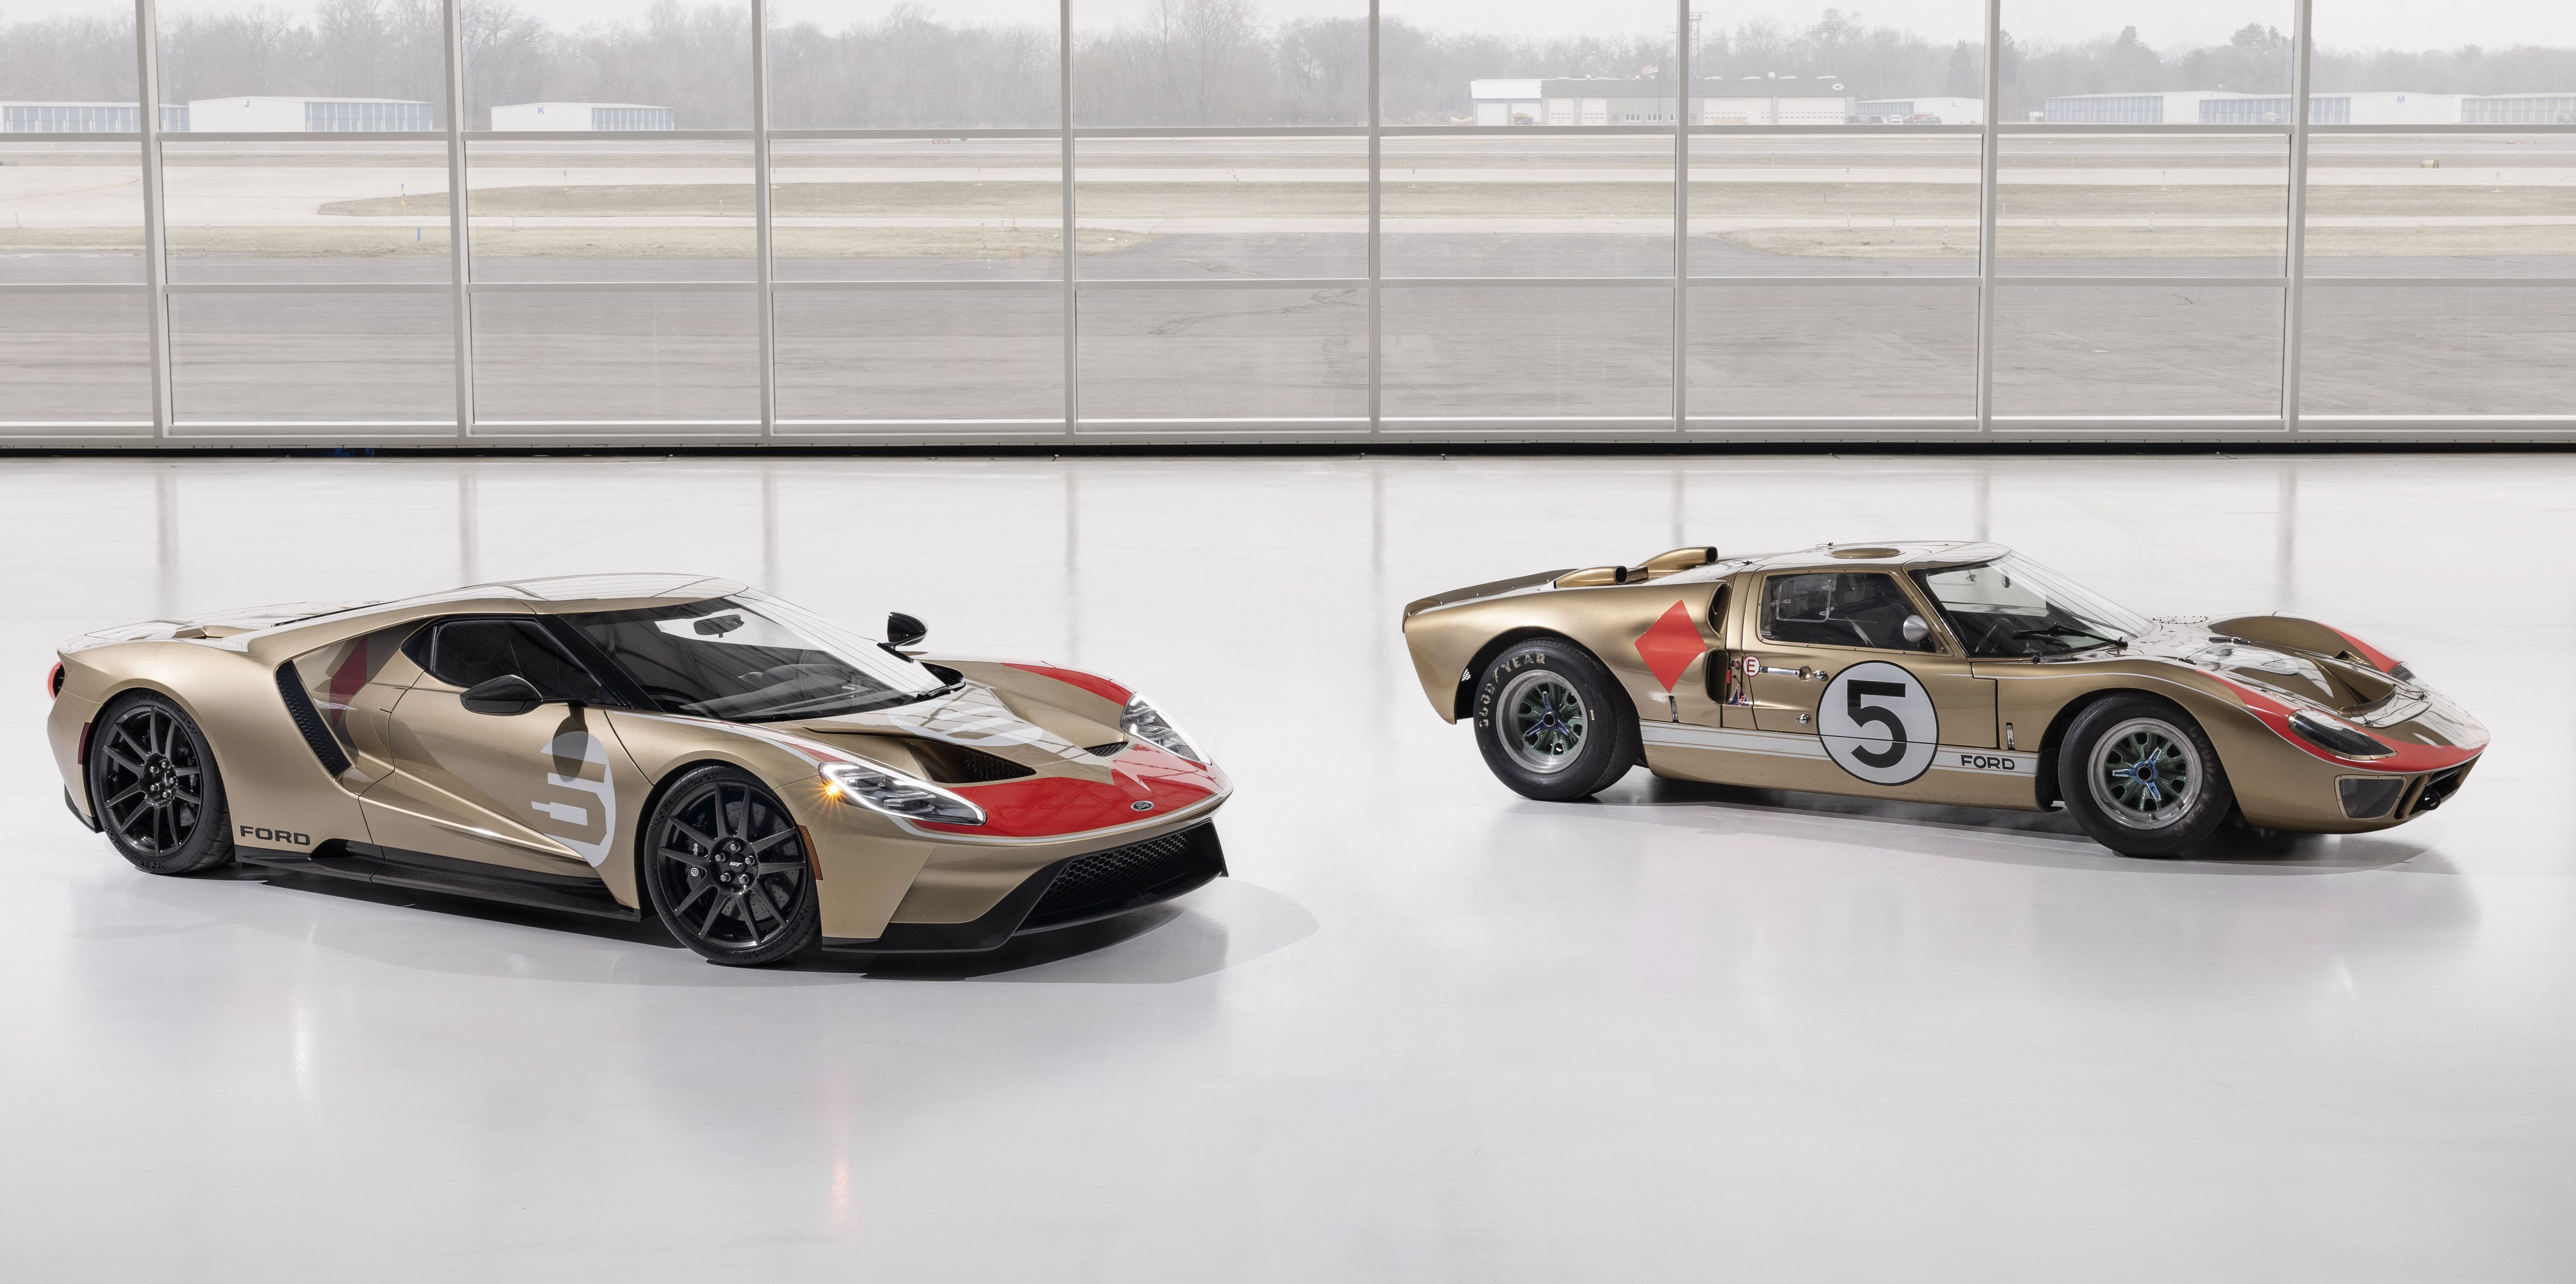 Ford GT Holman Moody Edition Pays Tribute to the '66 Le Mans 1-2-3